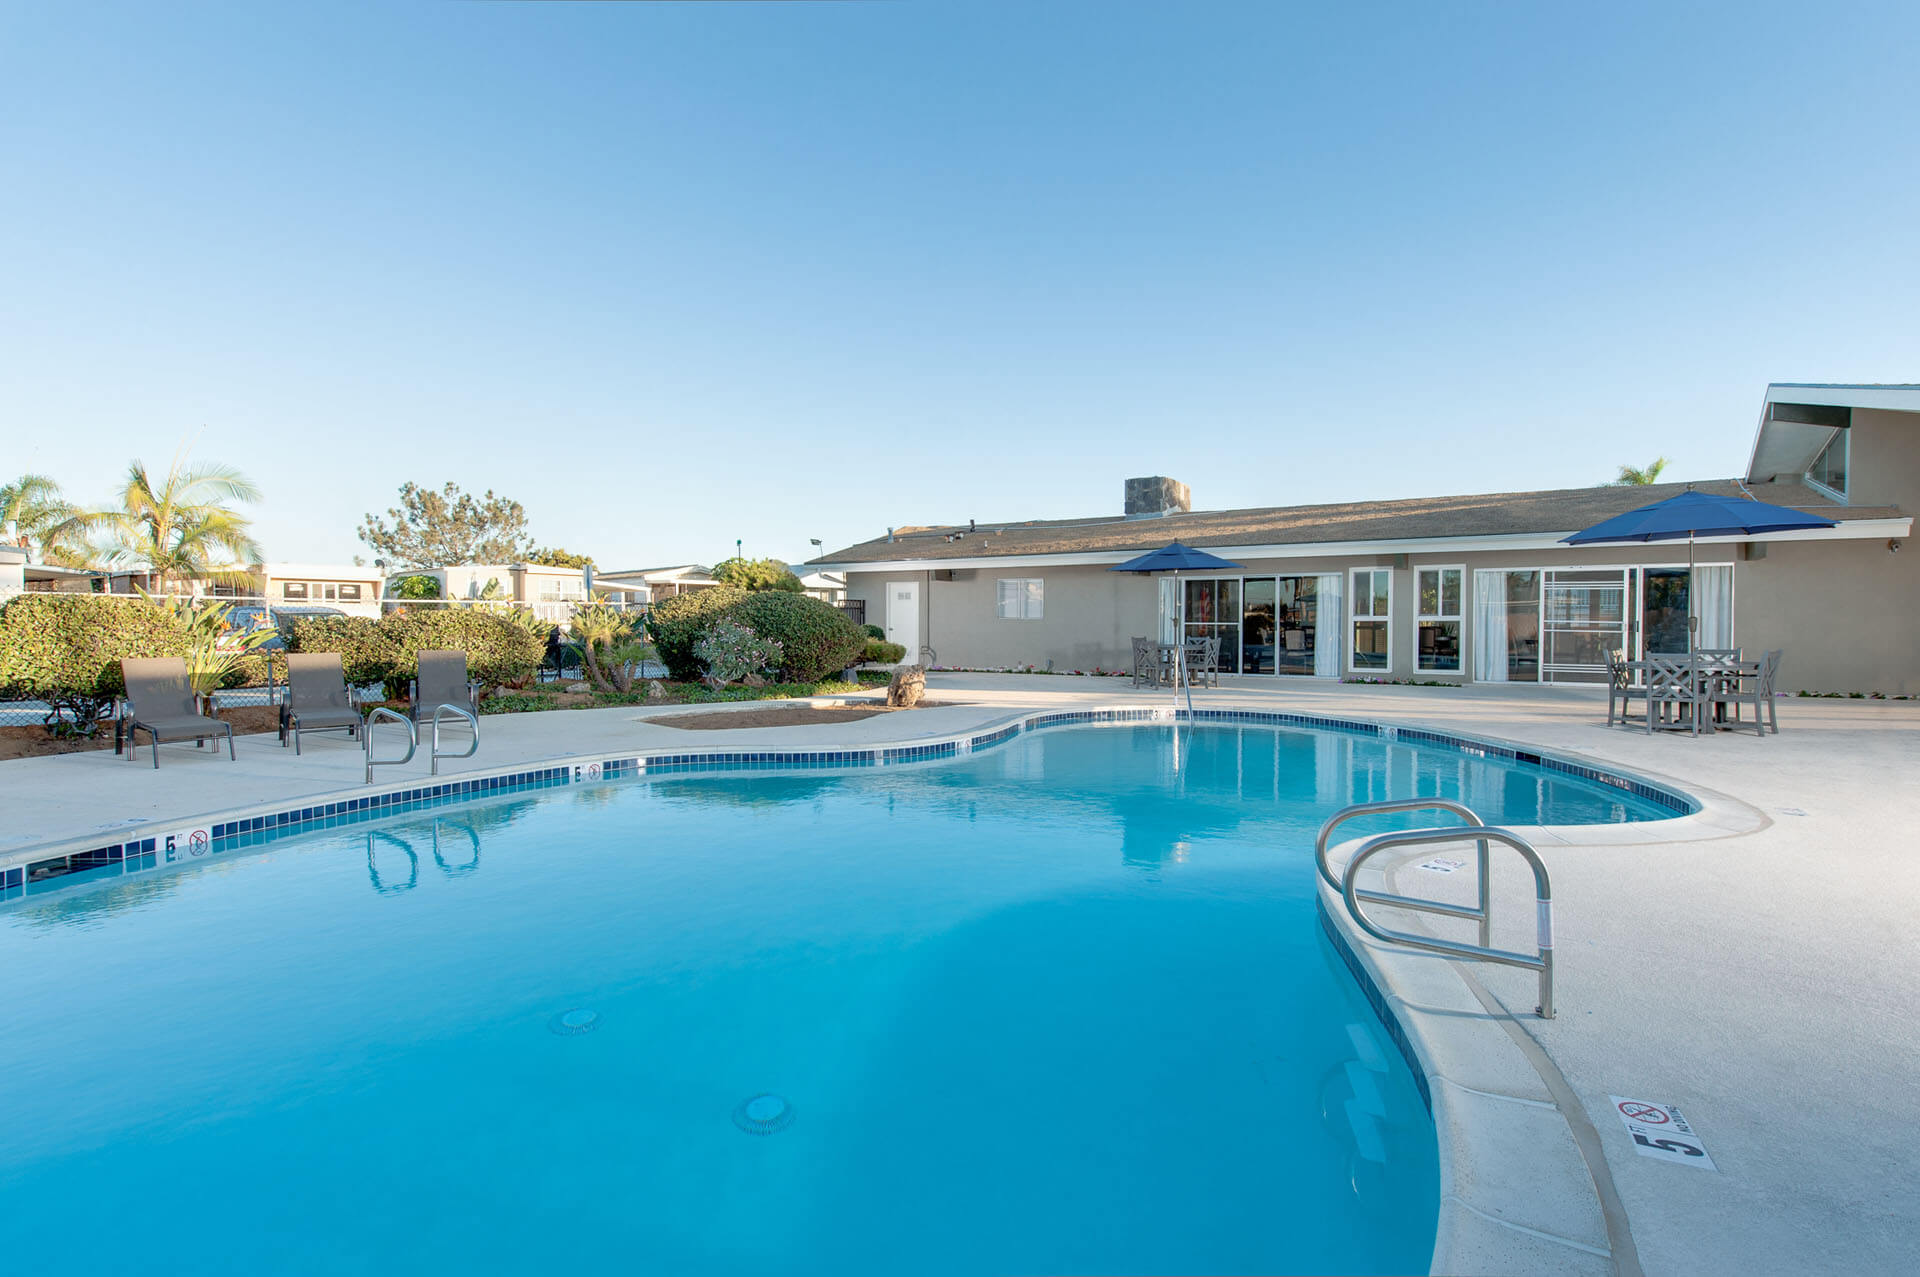 lanikai lane mobile home park pool and clubhouse carlsbad ca